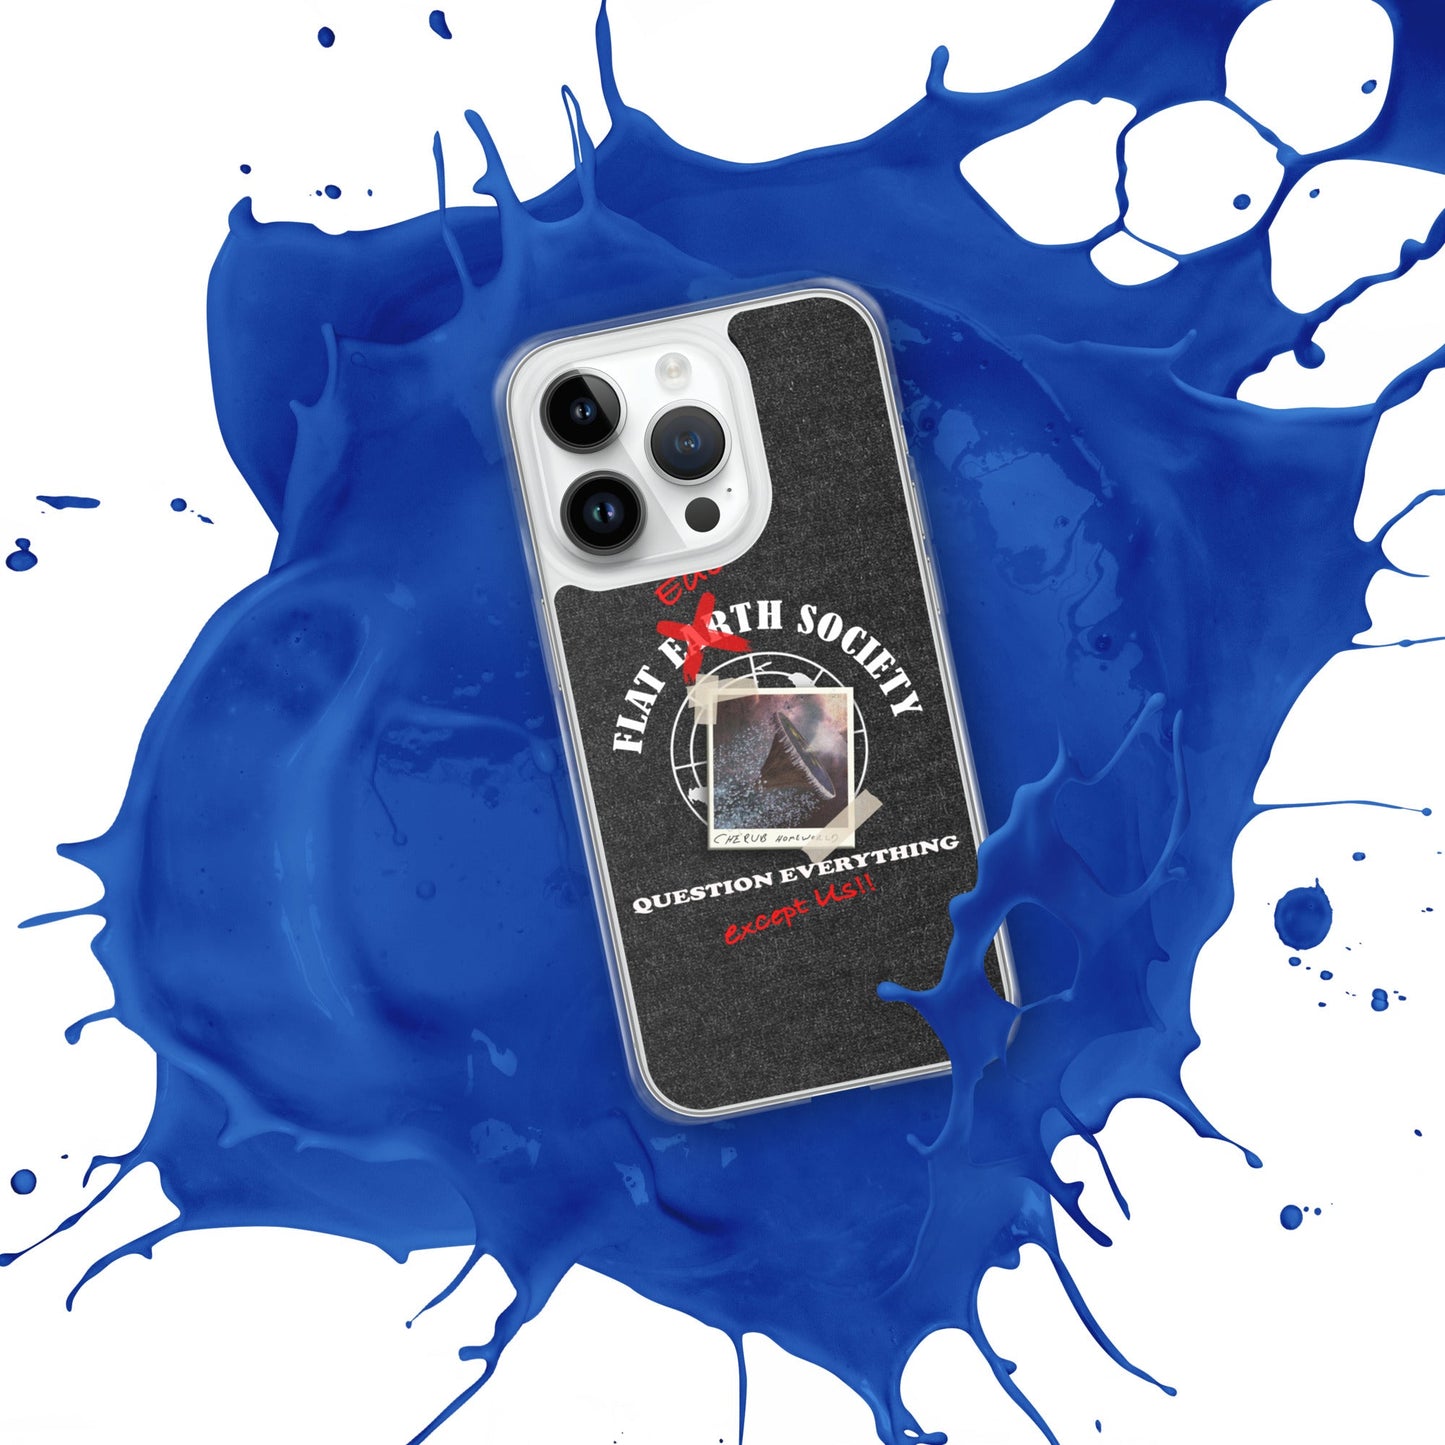 iPhone Case | Intergalactic Space Force 2 | Flat Eden Society - Spectral Ink Shop - Mobile Phone Cases -9780728_16241